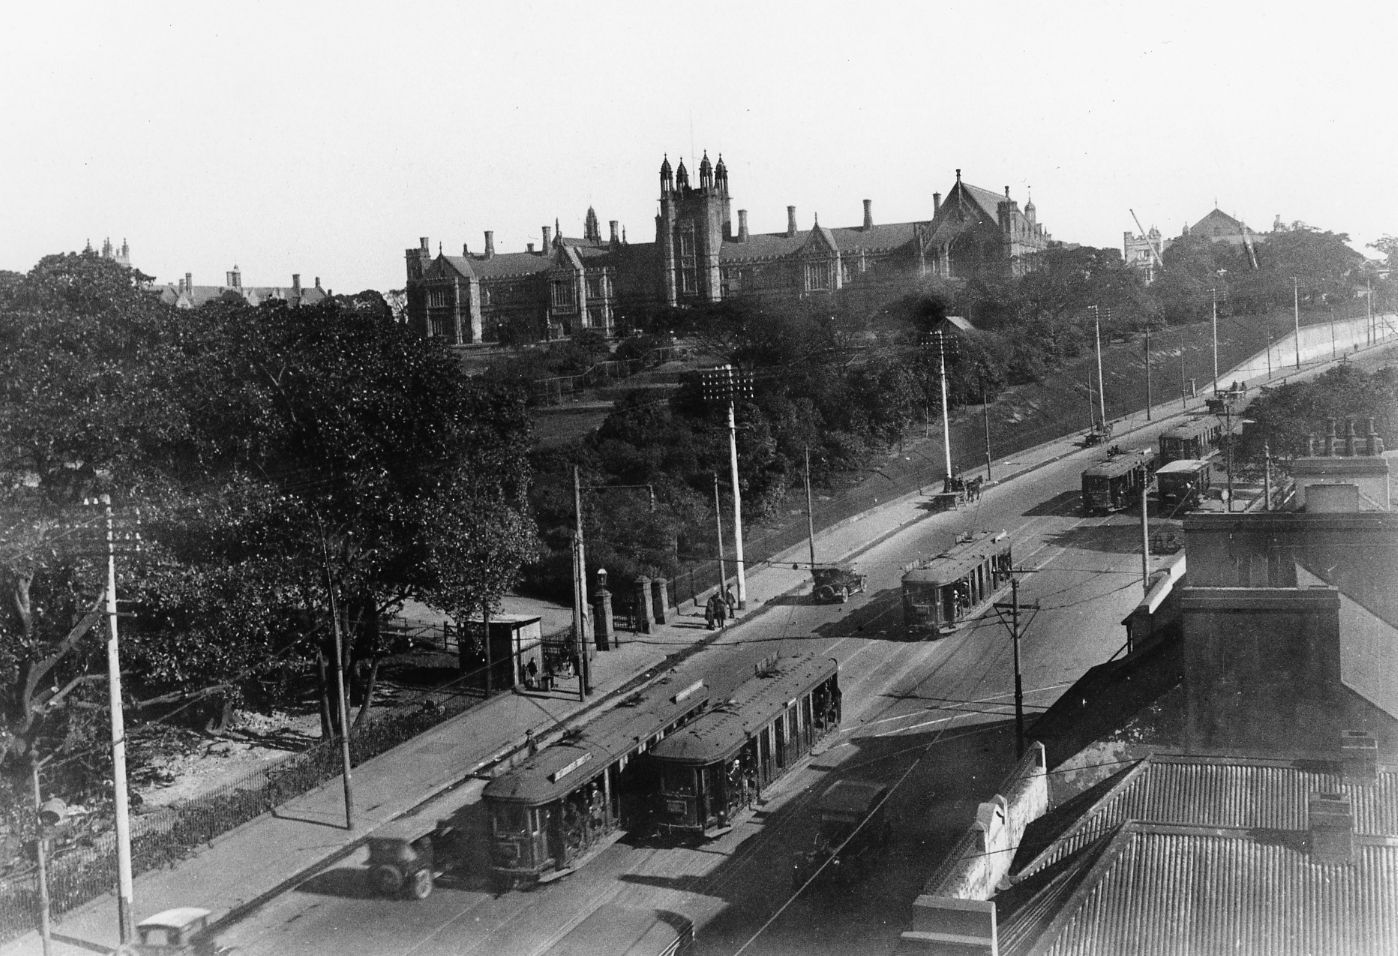 MAIN BUILDING AND GROUNDS FROM PARRAMATTA ROAD WITH TRAMS